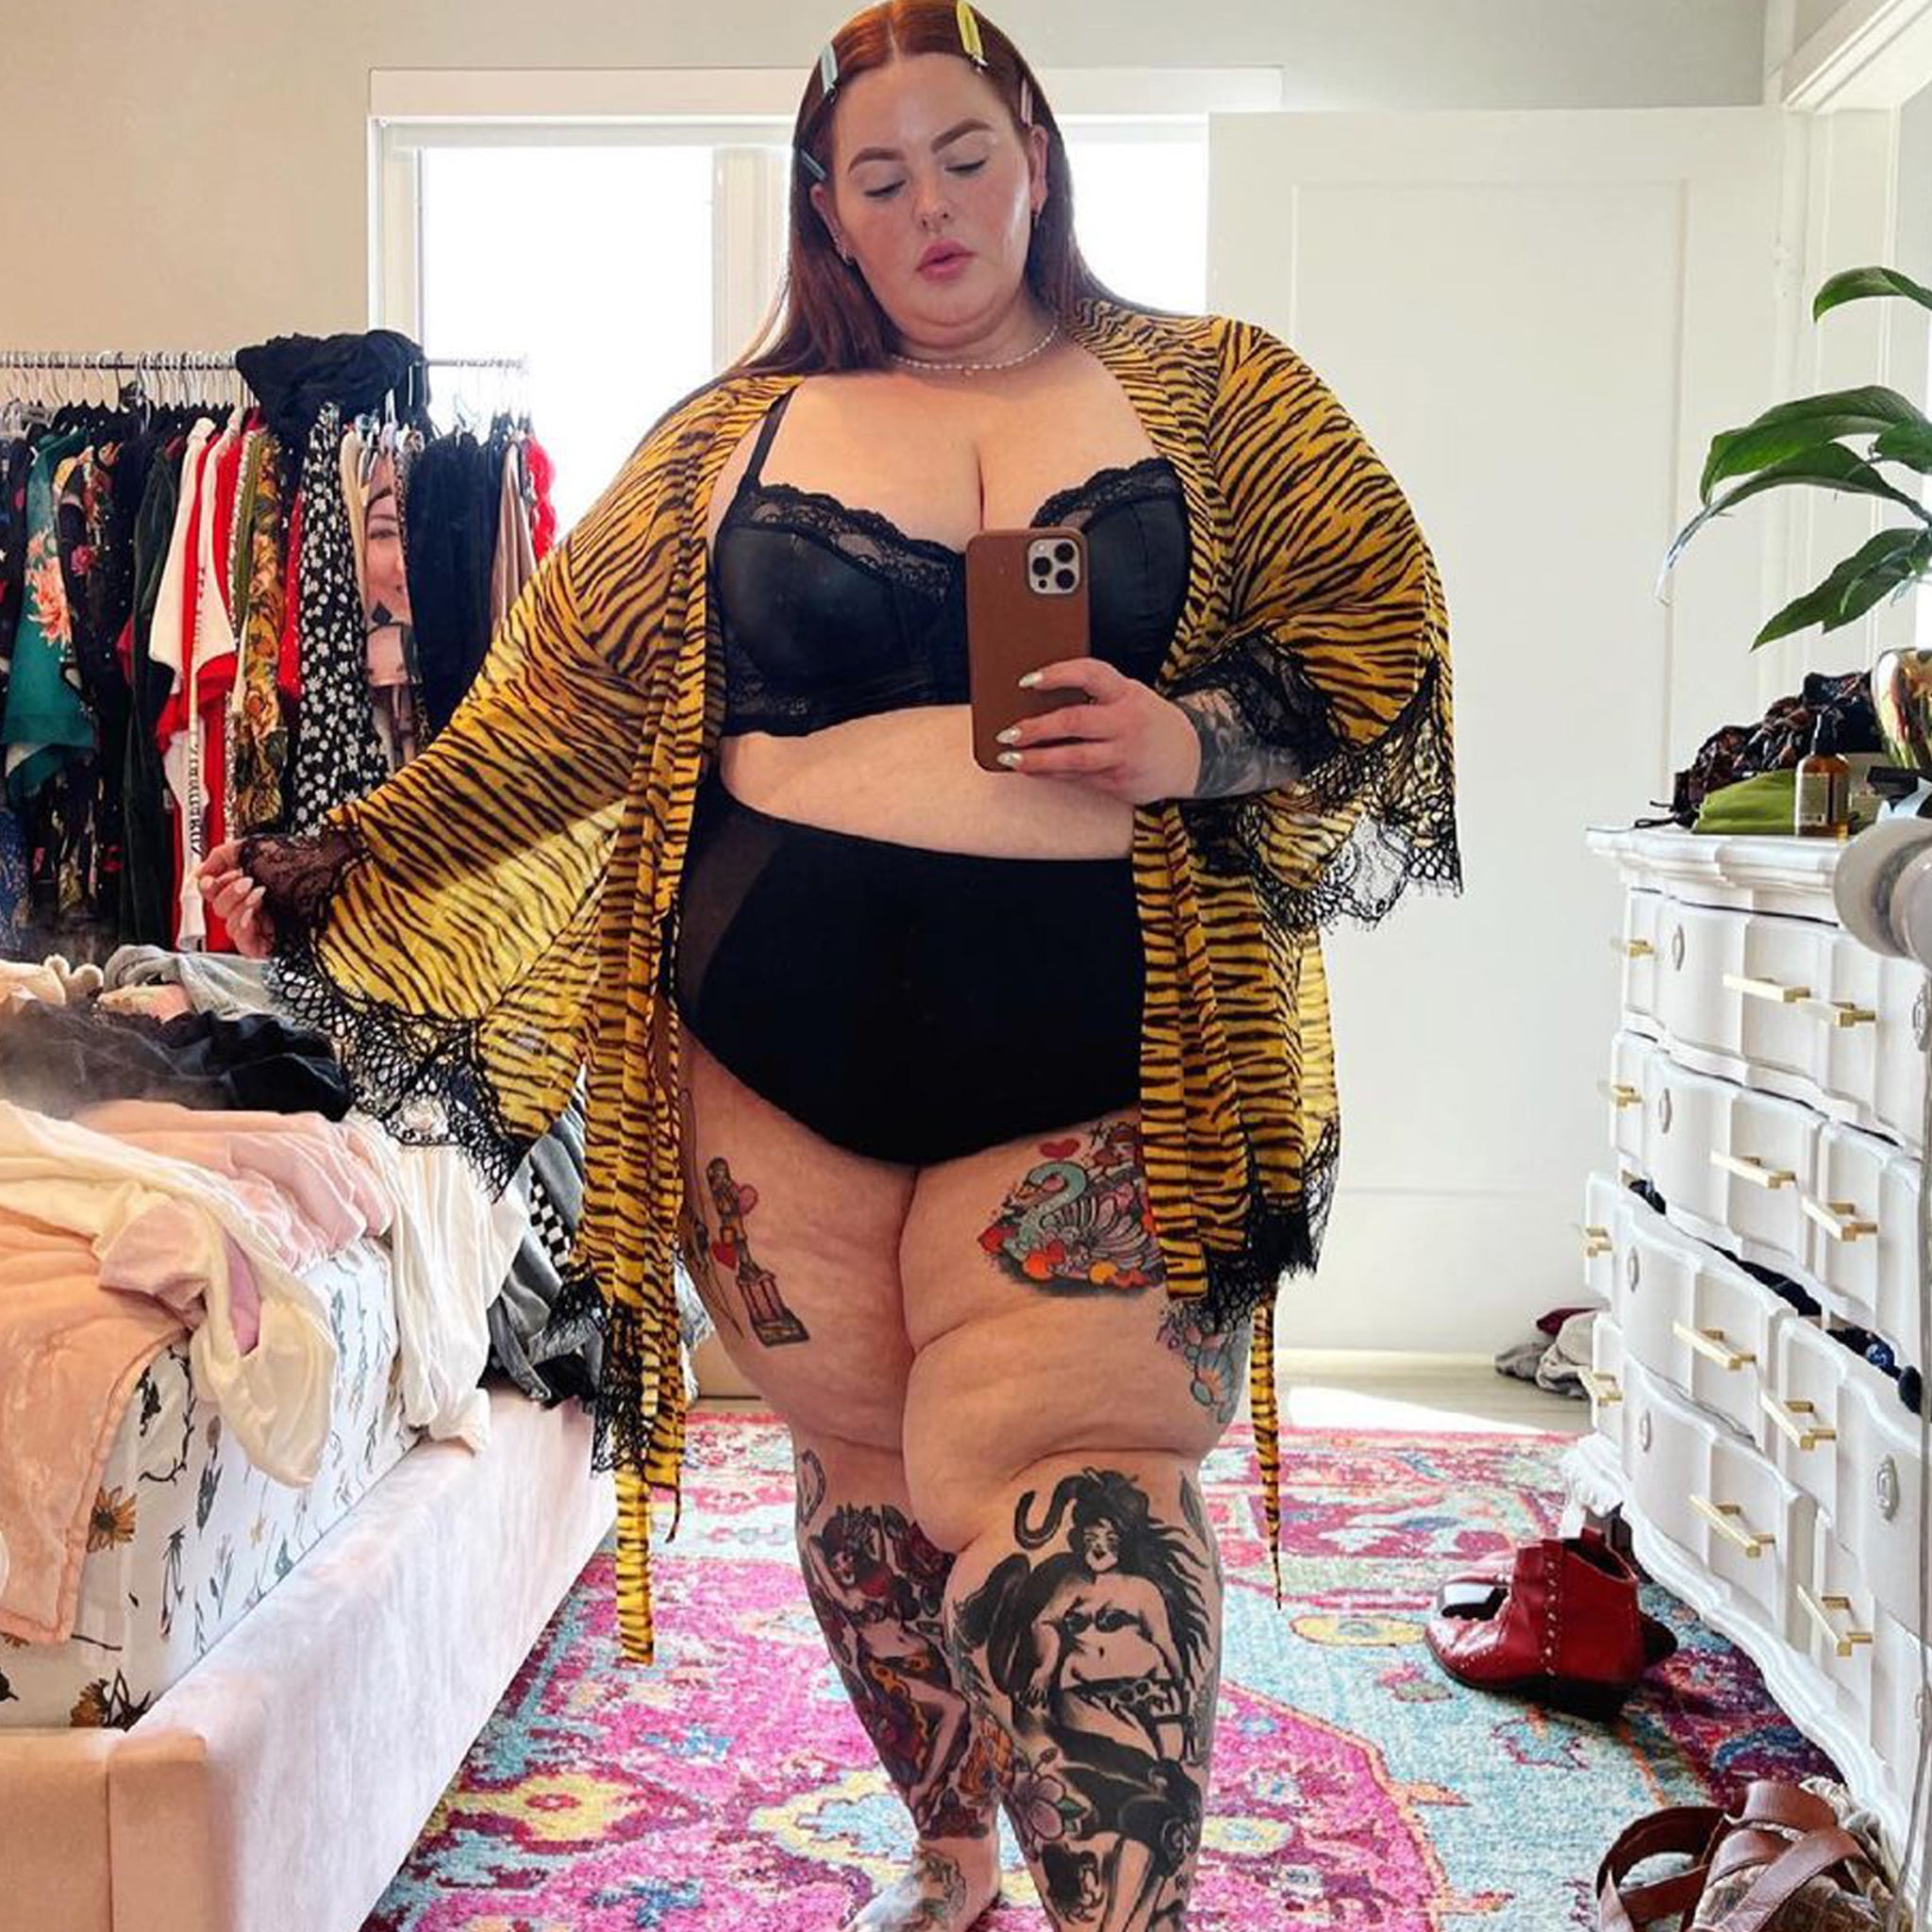 Model Tess Holliday reveals she's recovering from anorexia, Fashion